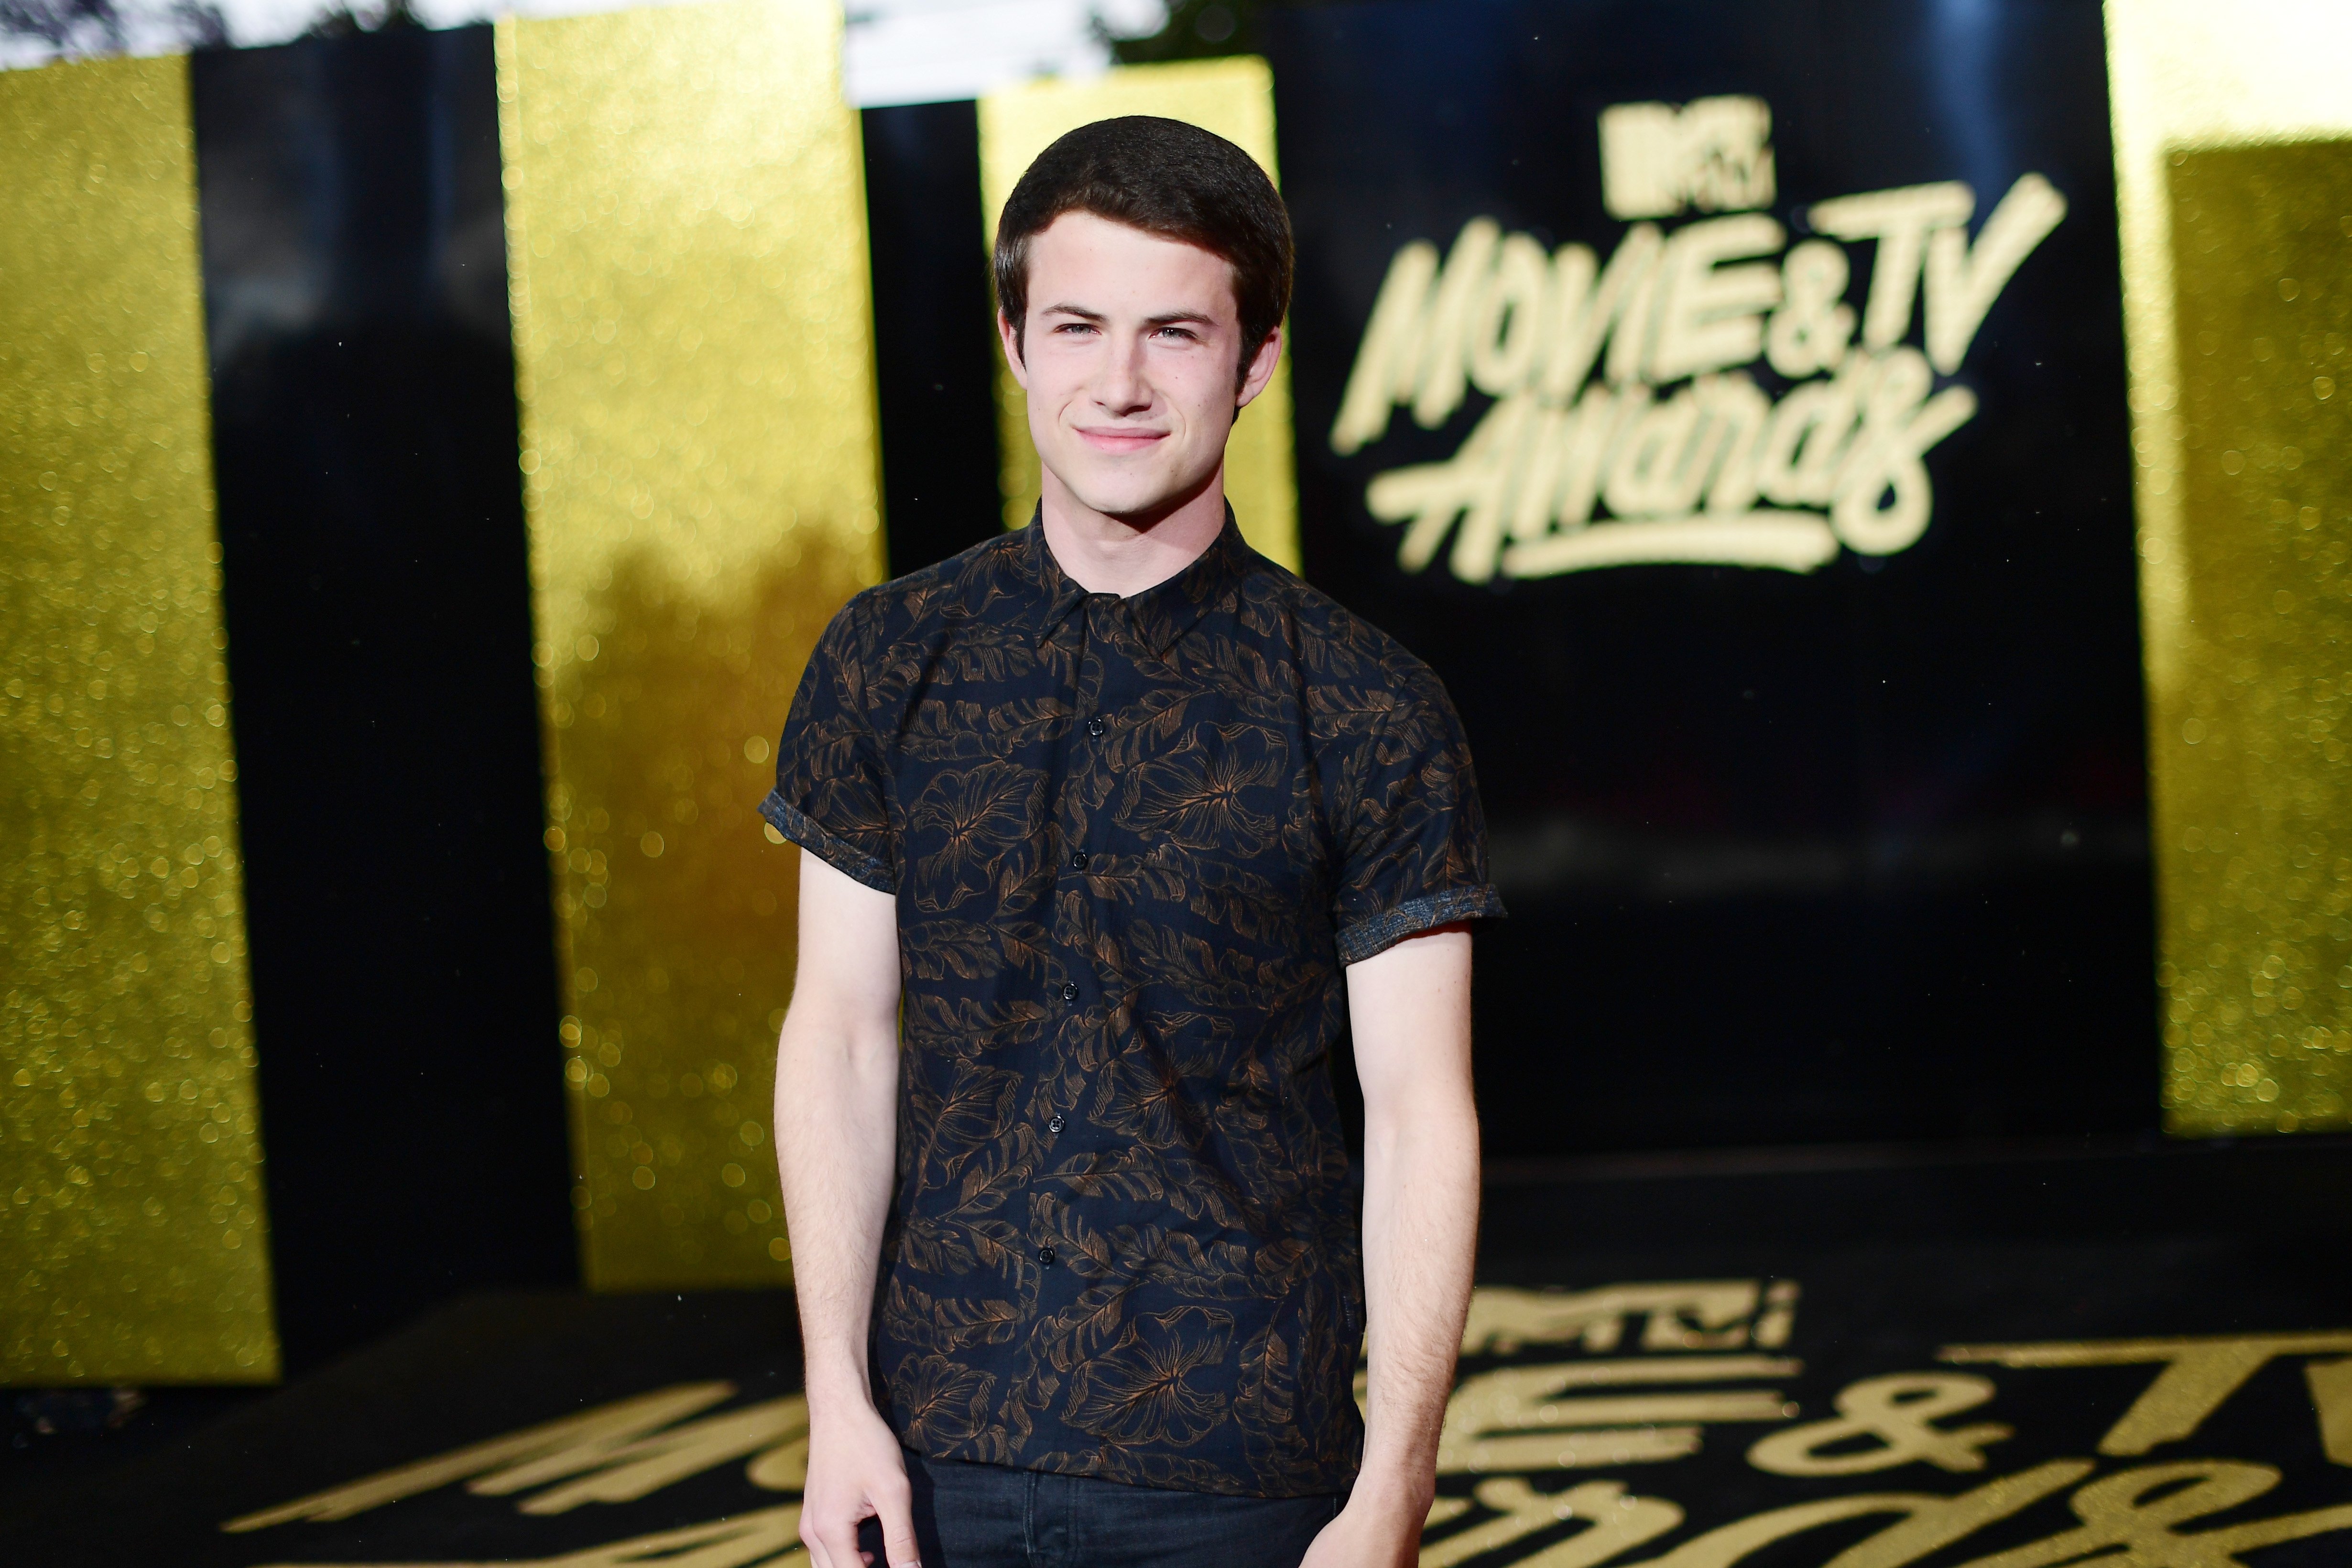 Dylan Minnette attends the 2017 MTV Movie and TV Awards at The Shrine Auditorium on May 7, 2017 in Los Angeles, California | Photo: Getty Images